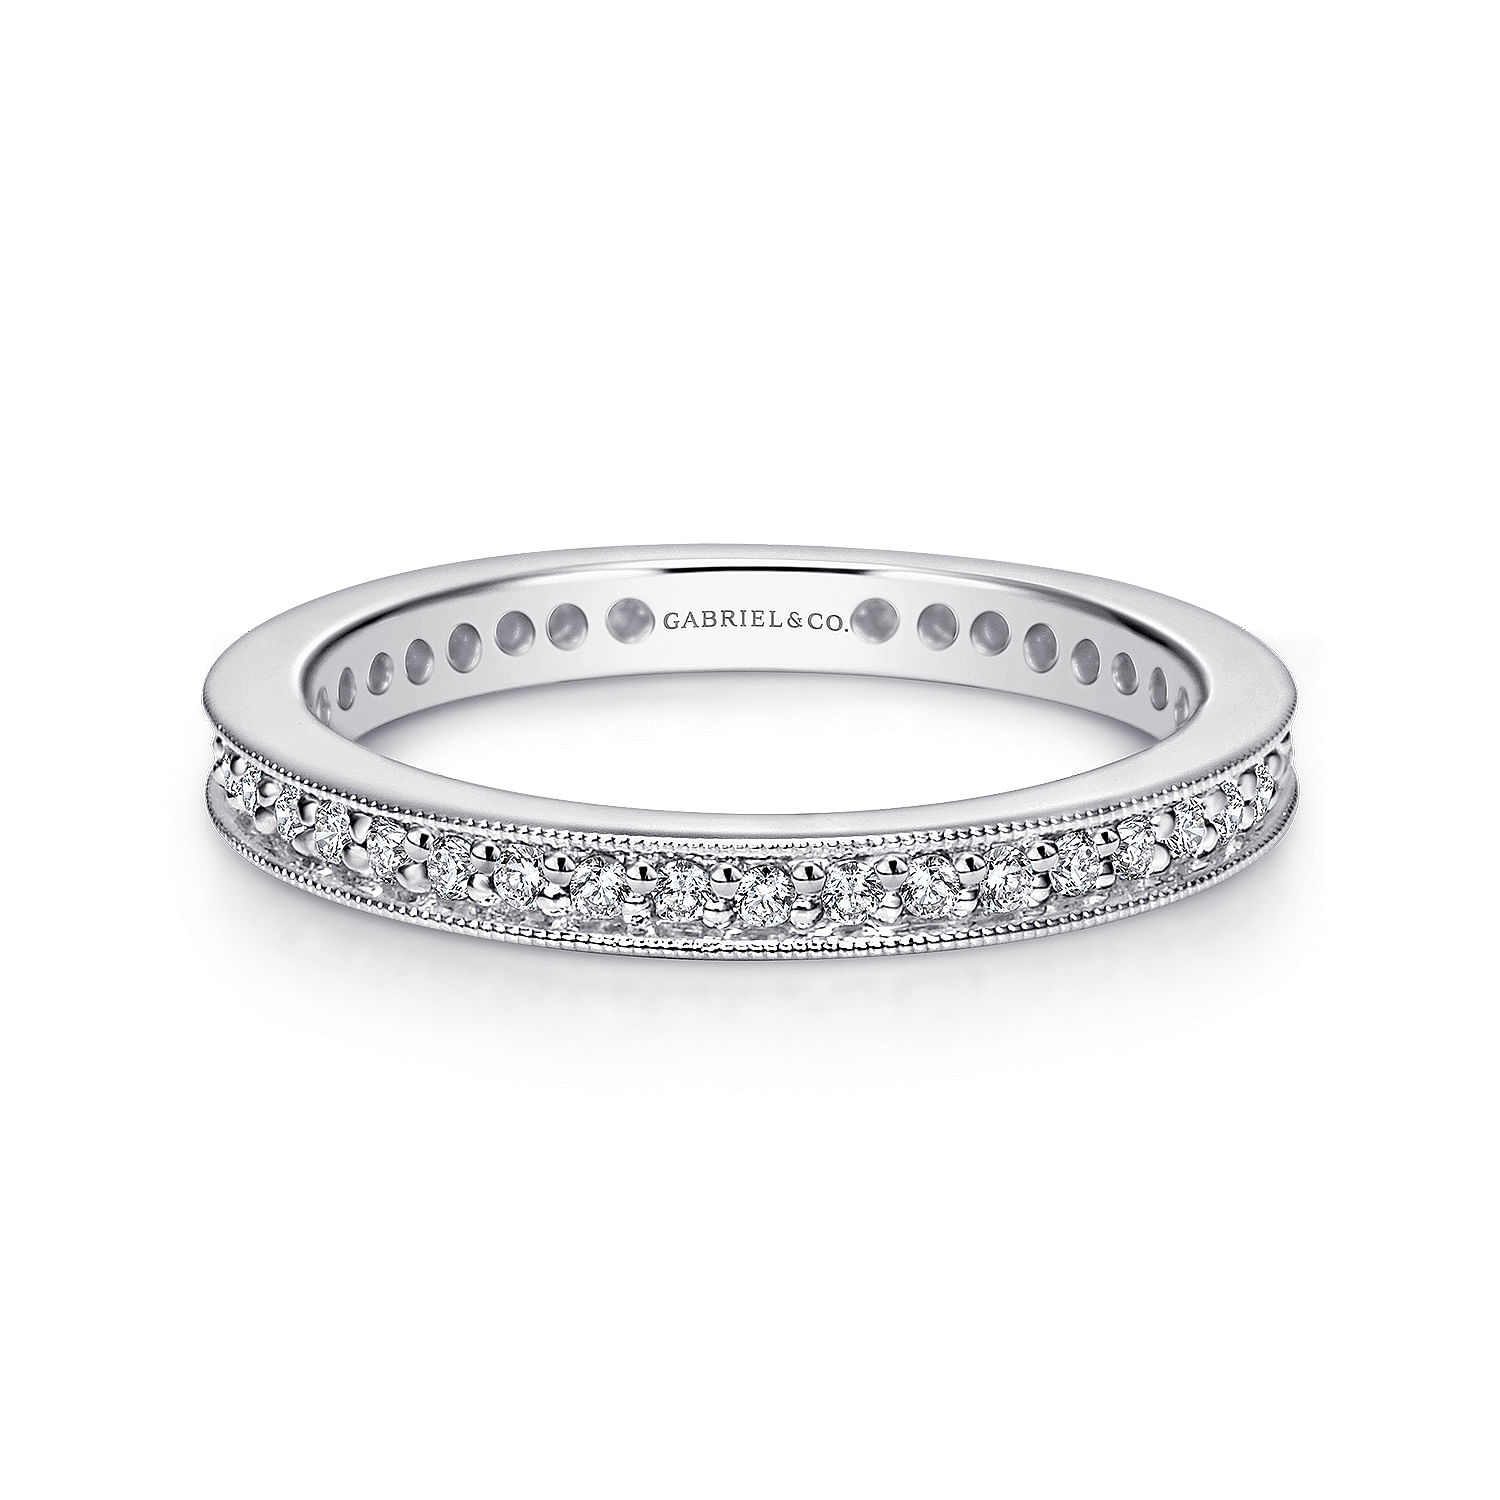 14K White Gold Channel Prong Diamond Eternity Band with Milgrain